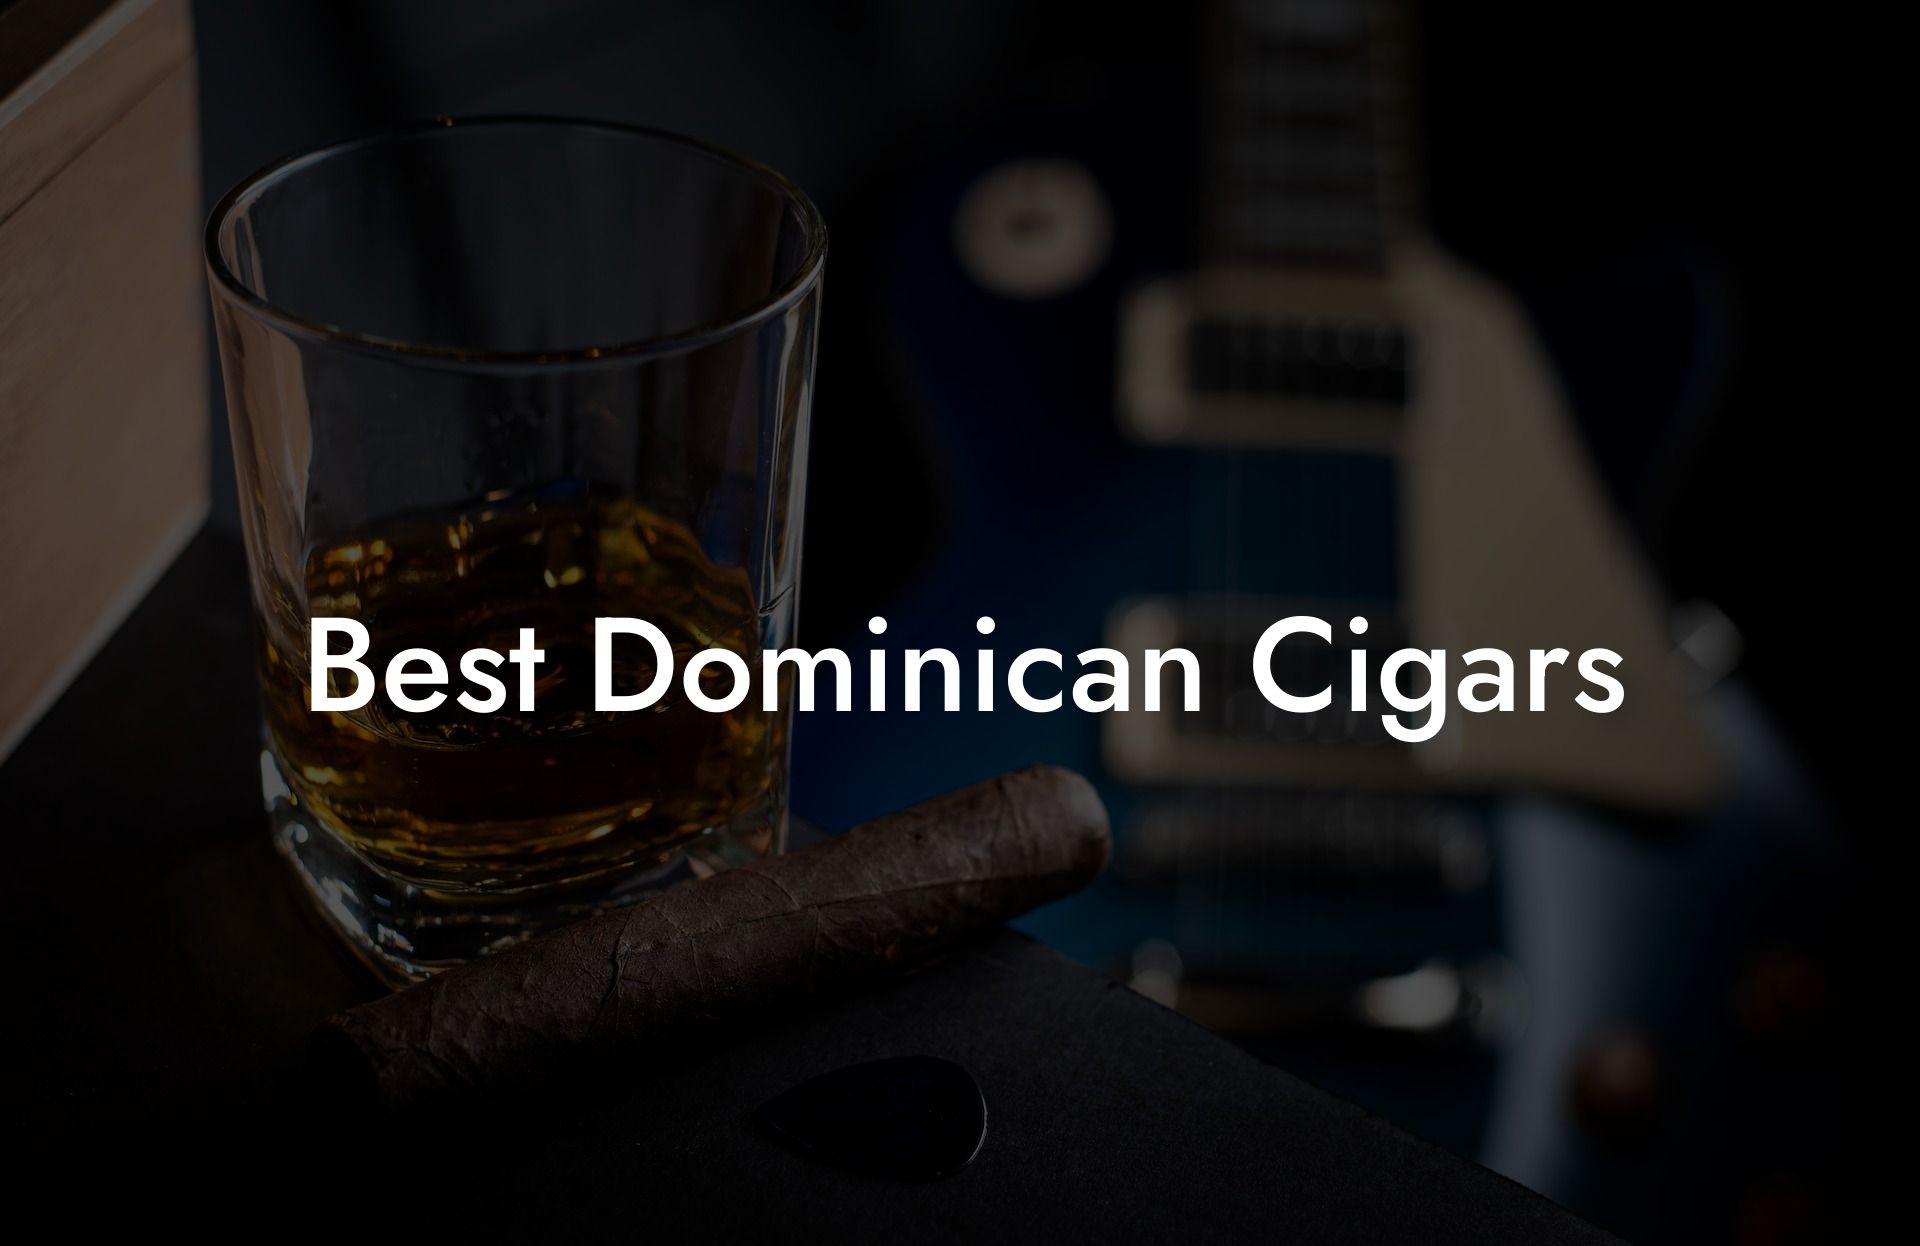 Best Dominican Cigars